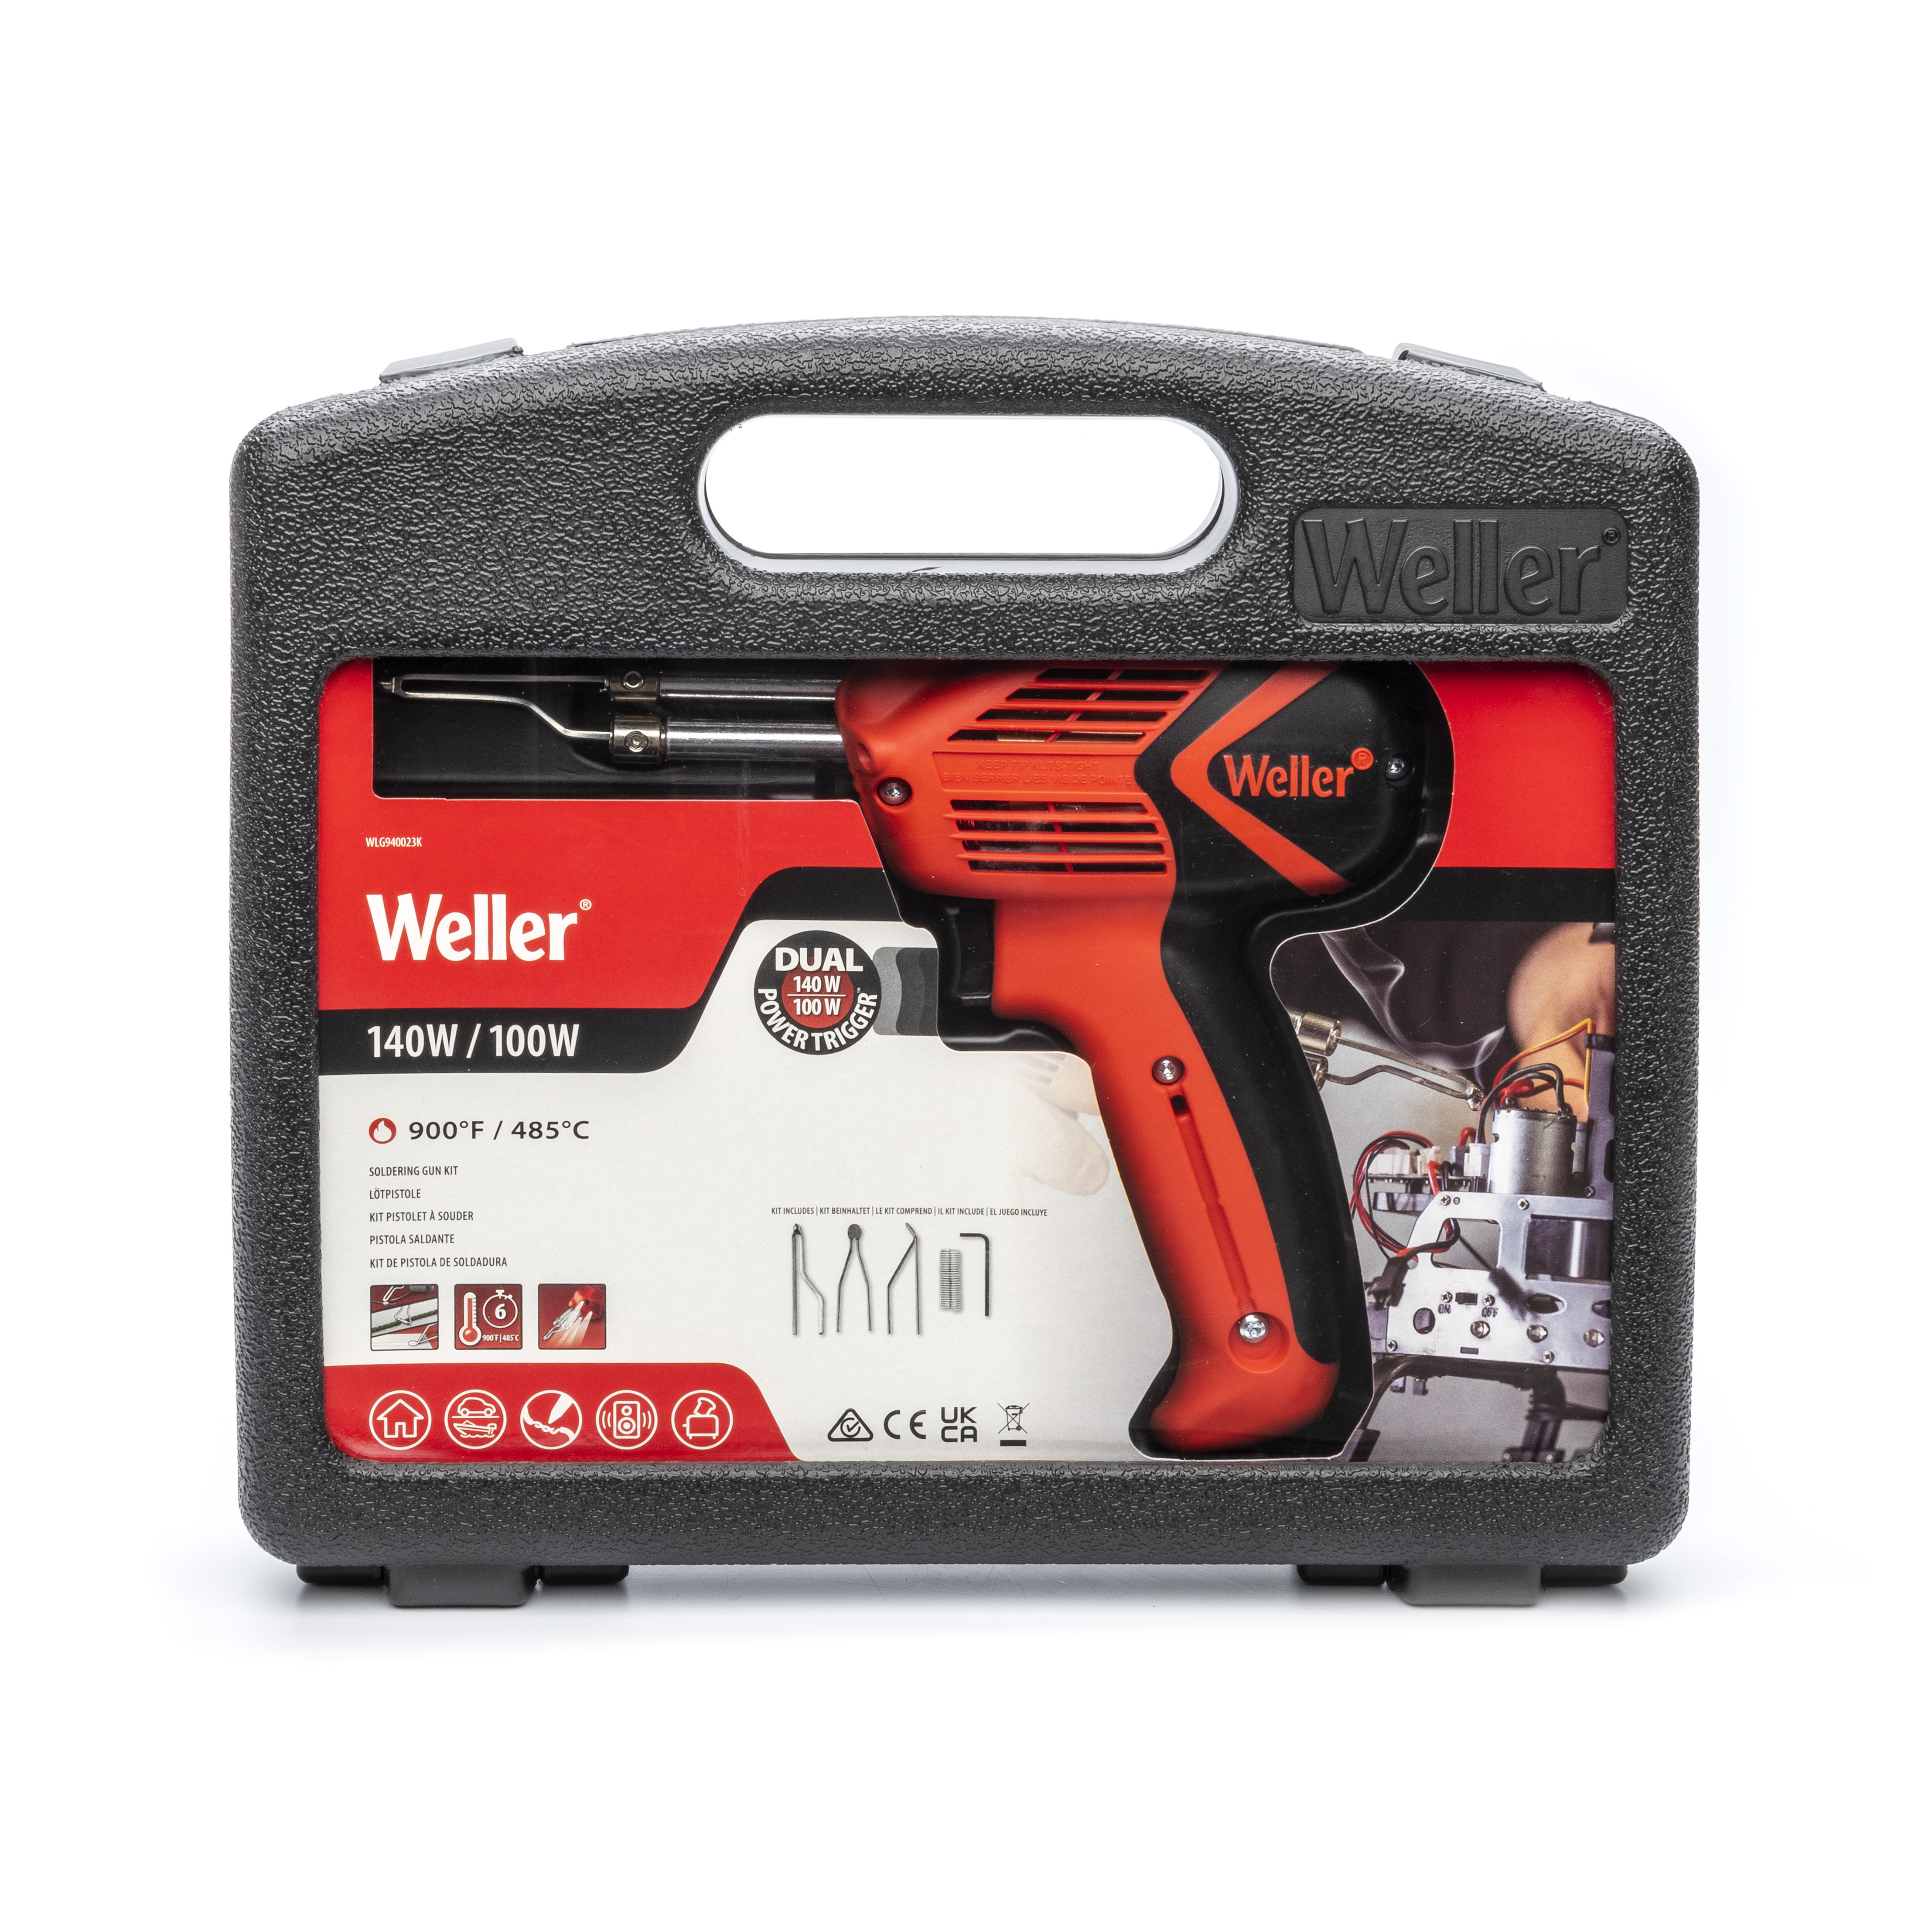 Weller WLG940023G 140W/100W Soldering Gun, for Heavy-Duty Soldering, Cutting, and Smoothing Applications